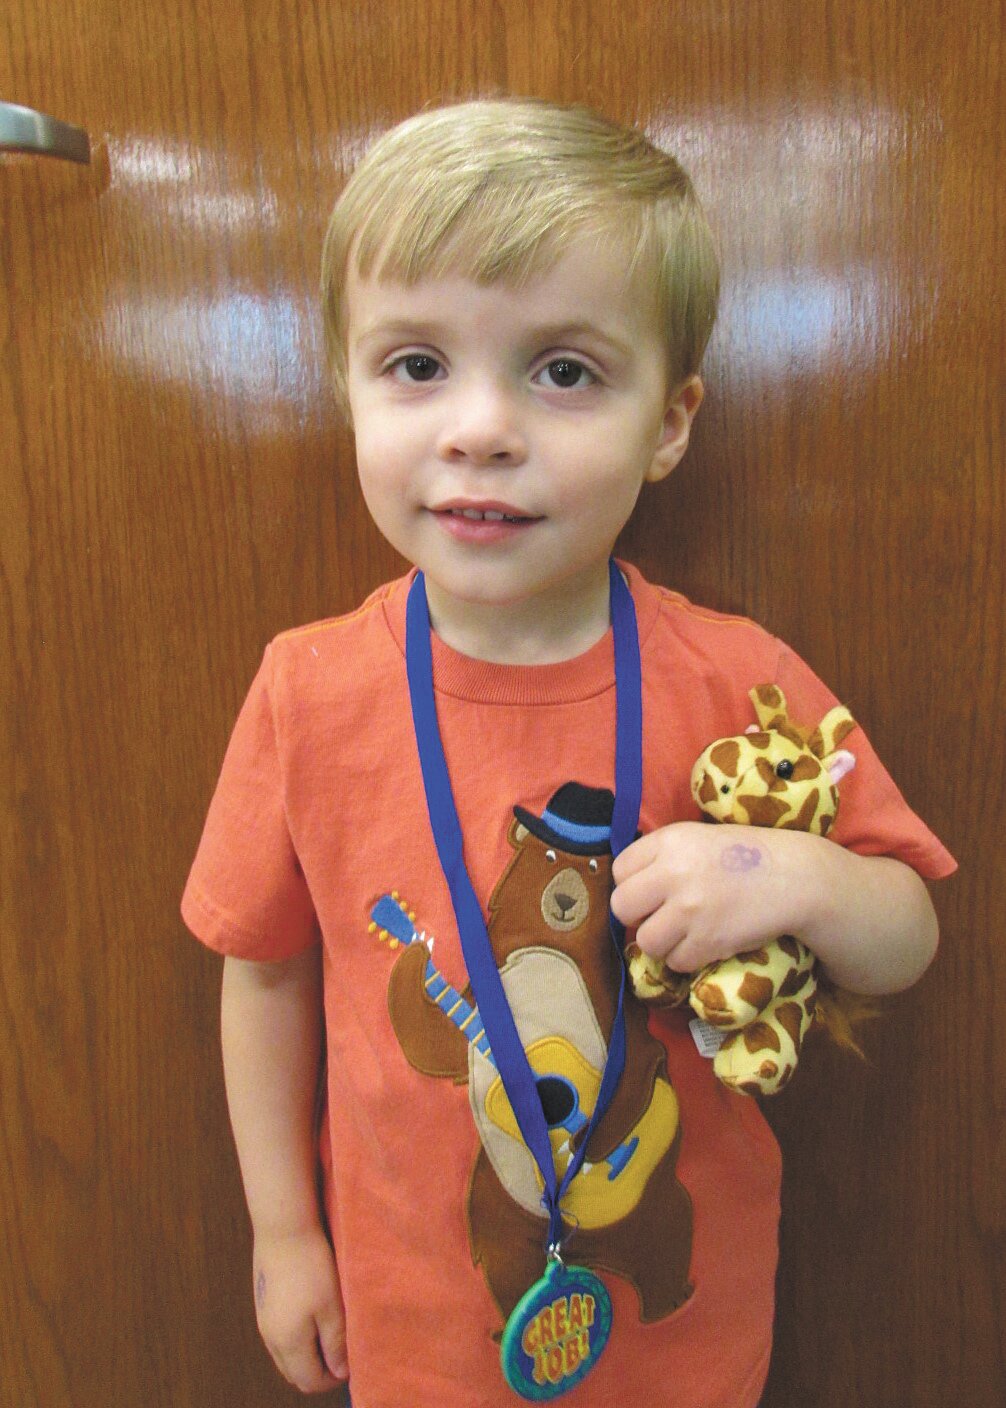 Oliver Fossnock, age 2, has completed the 1,000 Books Before Kindergarten program at the Crawfordsville District Public Library. He is the son of Mary and Josh Fossnock. Oliver's favorite book is "The Animals of Farmer Jones" by Leah Gale. Mom said, "Oliver loves to read thanks, in large part, to the program. He loves going to toddler story time at the library!"